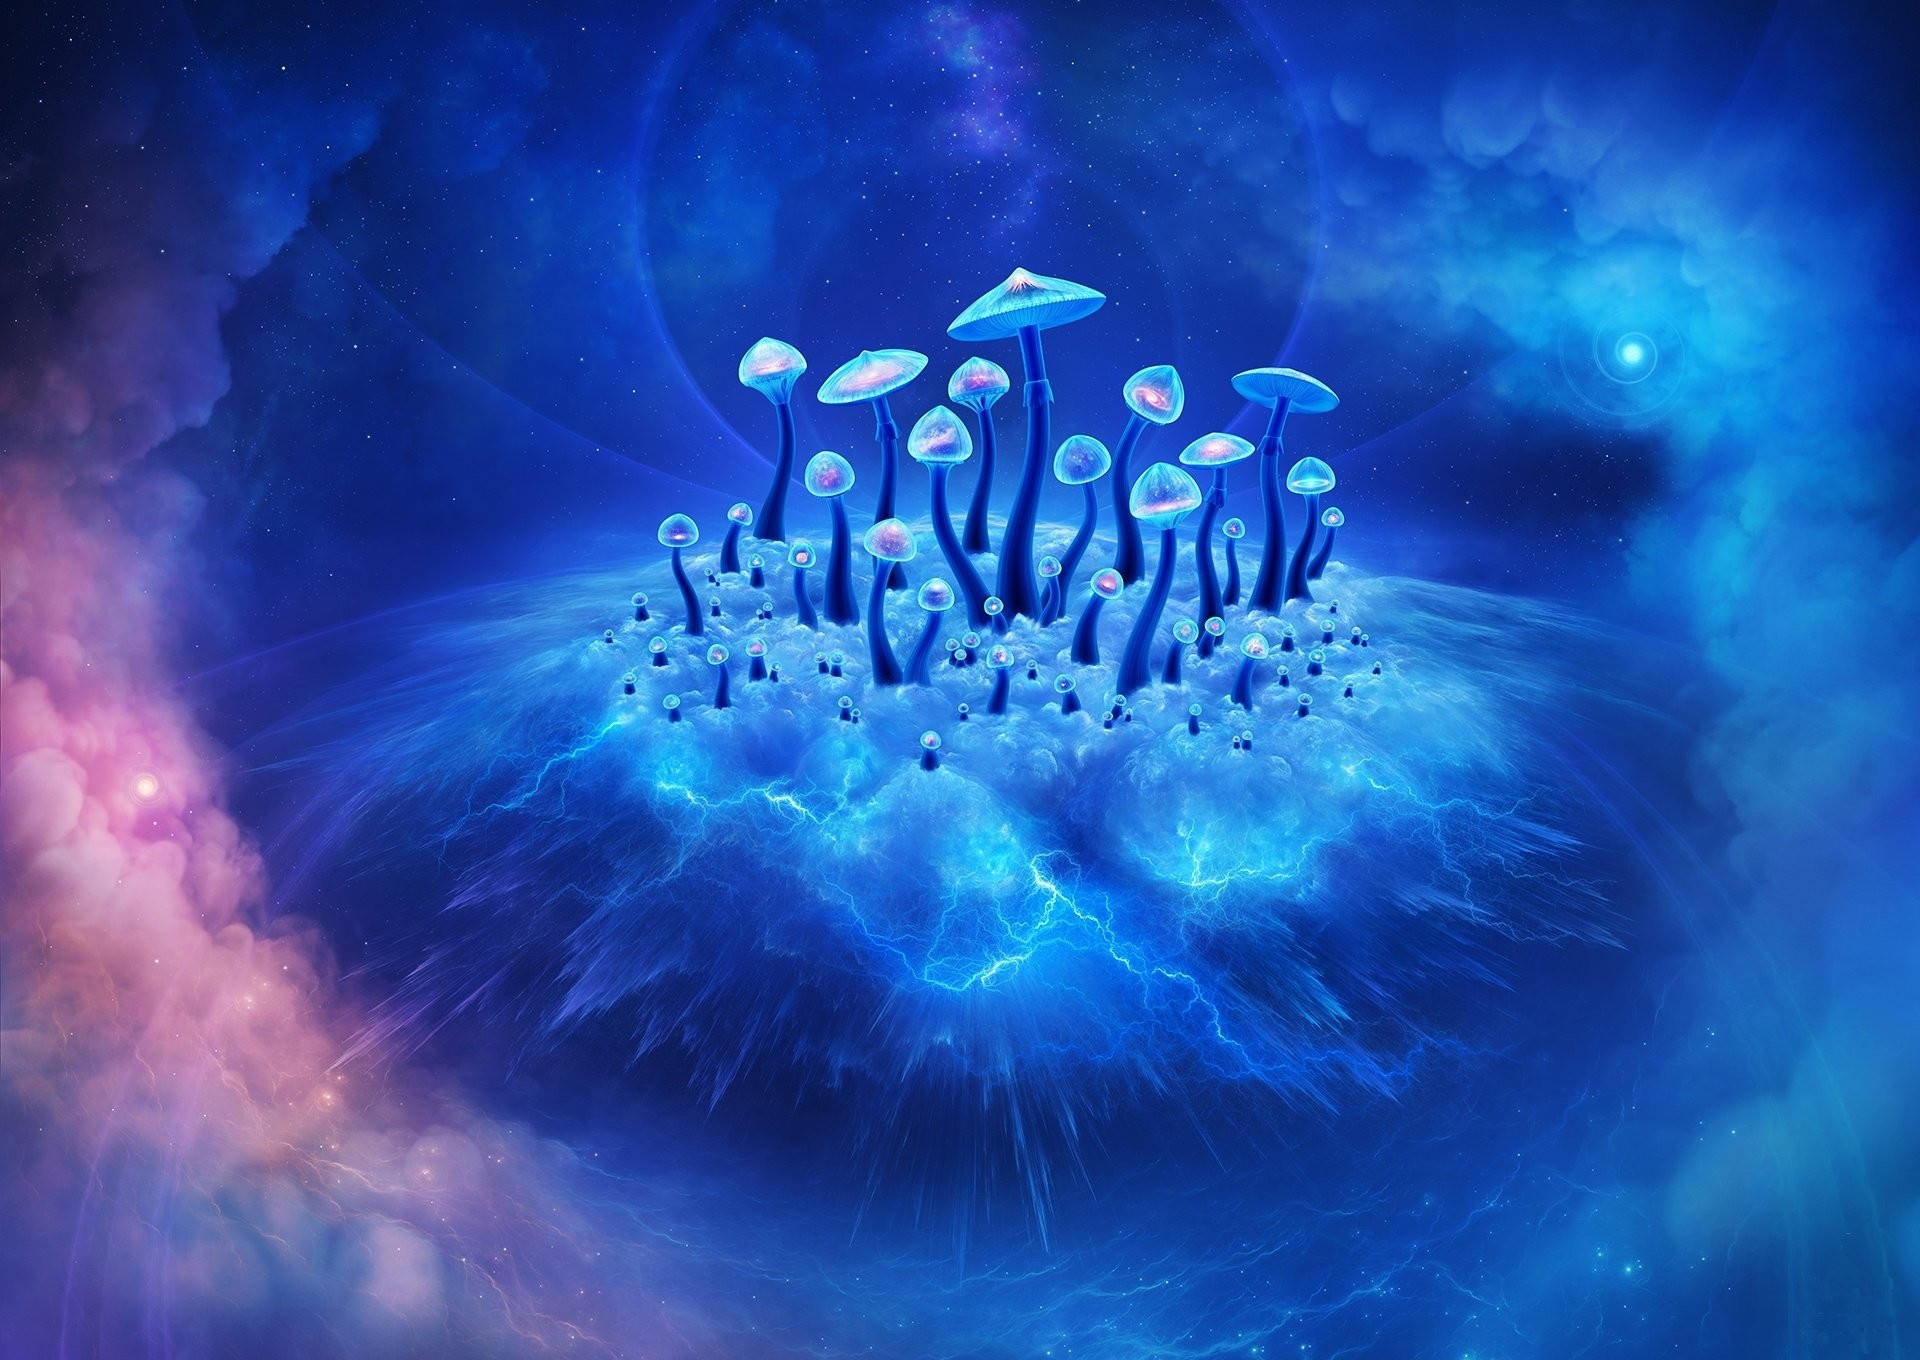 A close up of a psychedelic mushroom illuminated by sunlight Wallpaper